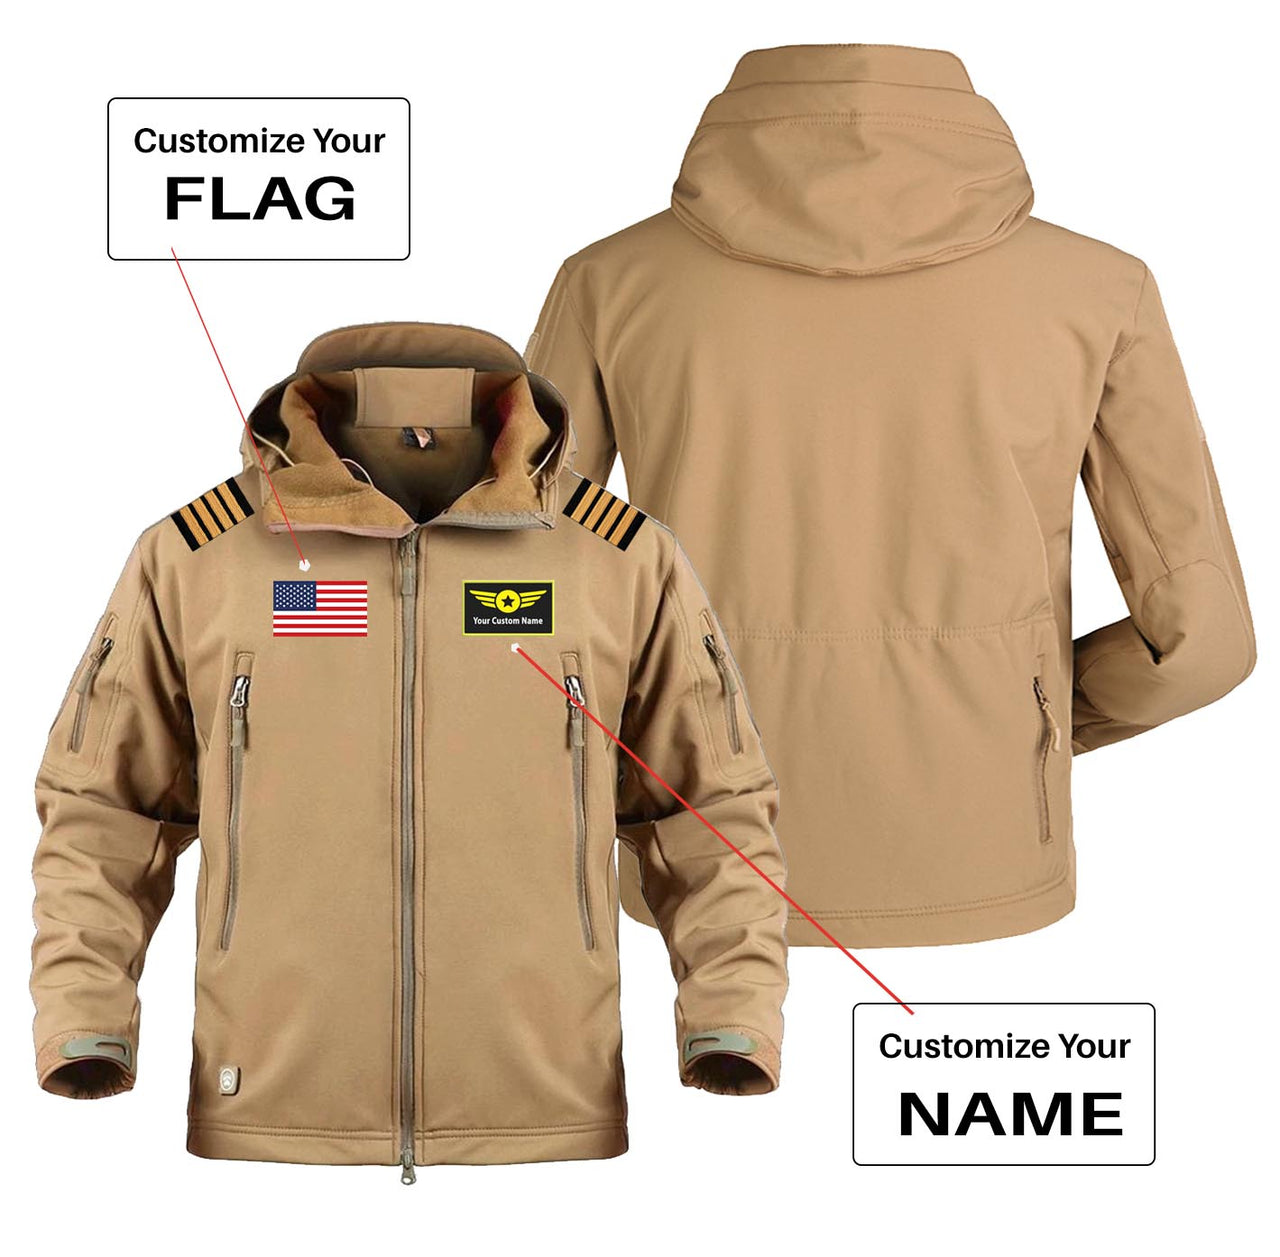 Custom Flag & Name with EPAULETTES (Special Badge) Military Pilot Jackets